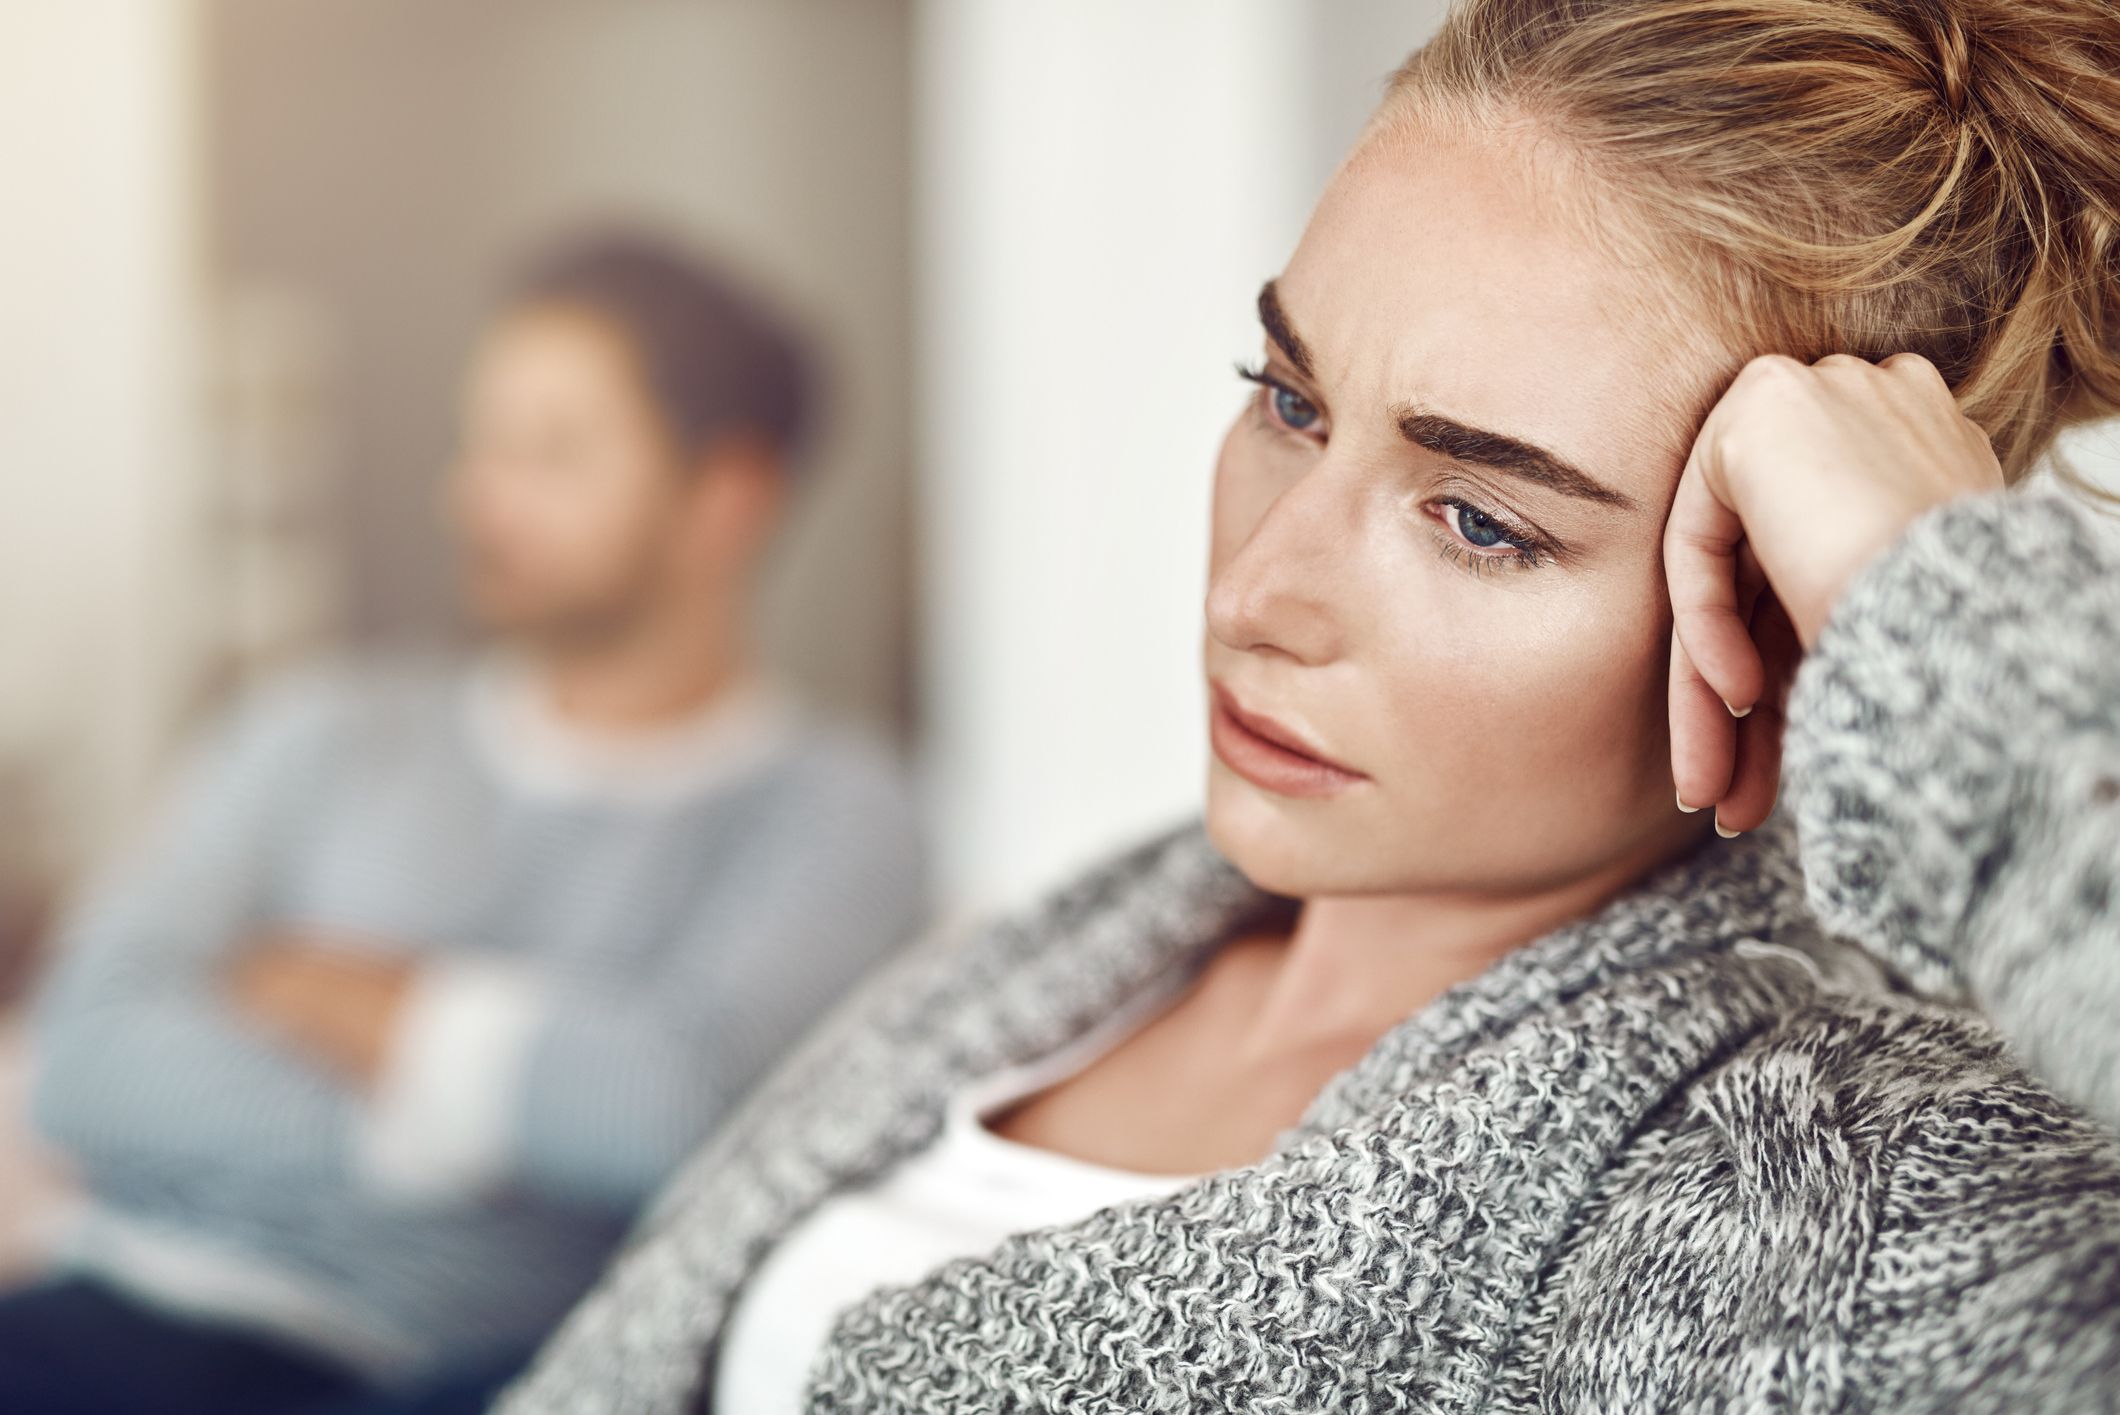 9 Ways to End a Toxic Relationship - Toxic Relationship Signs